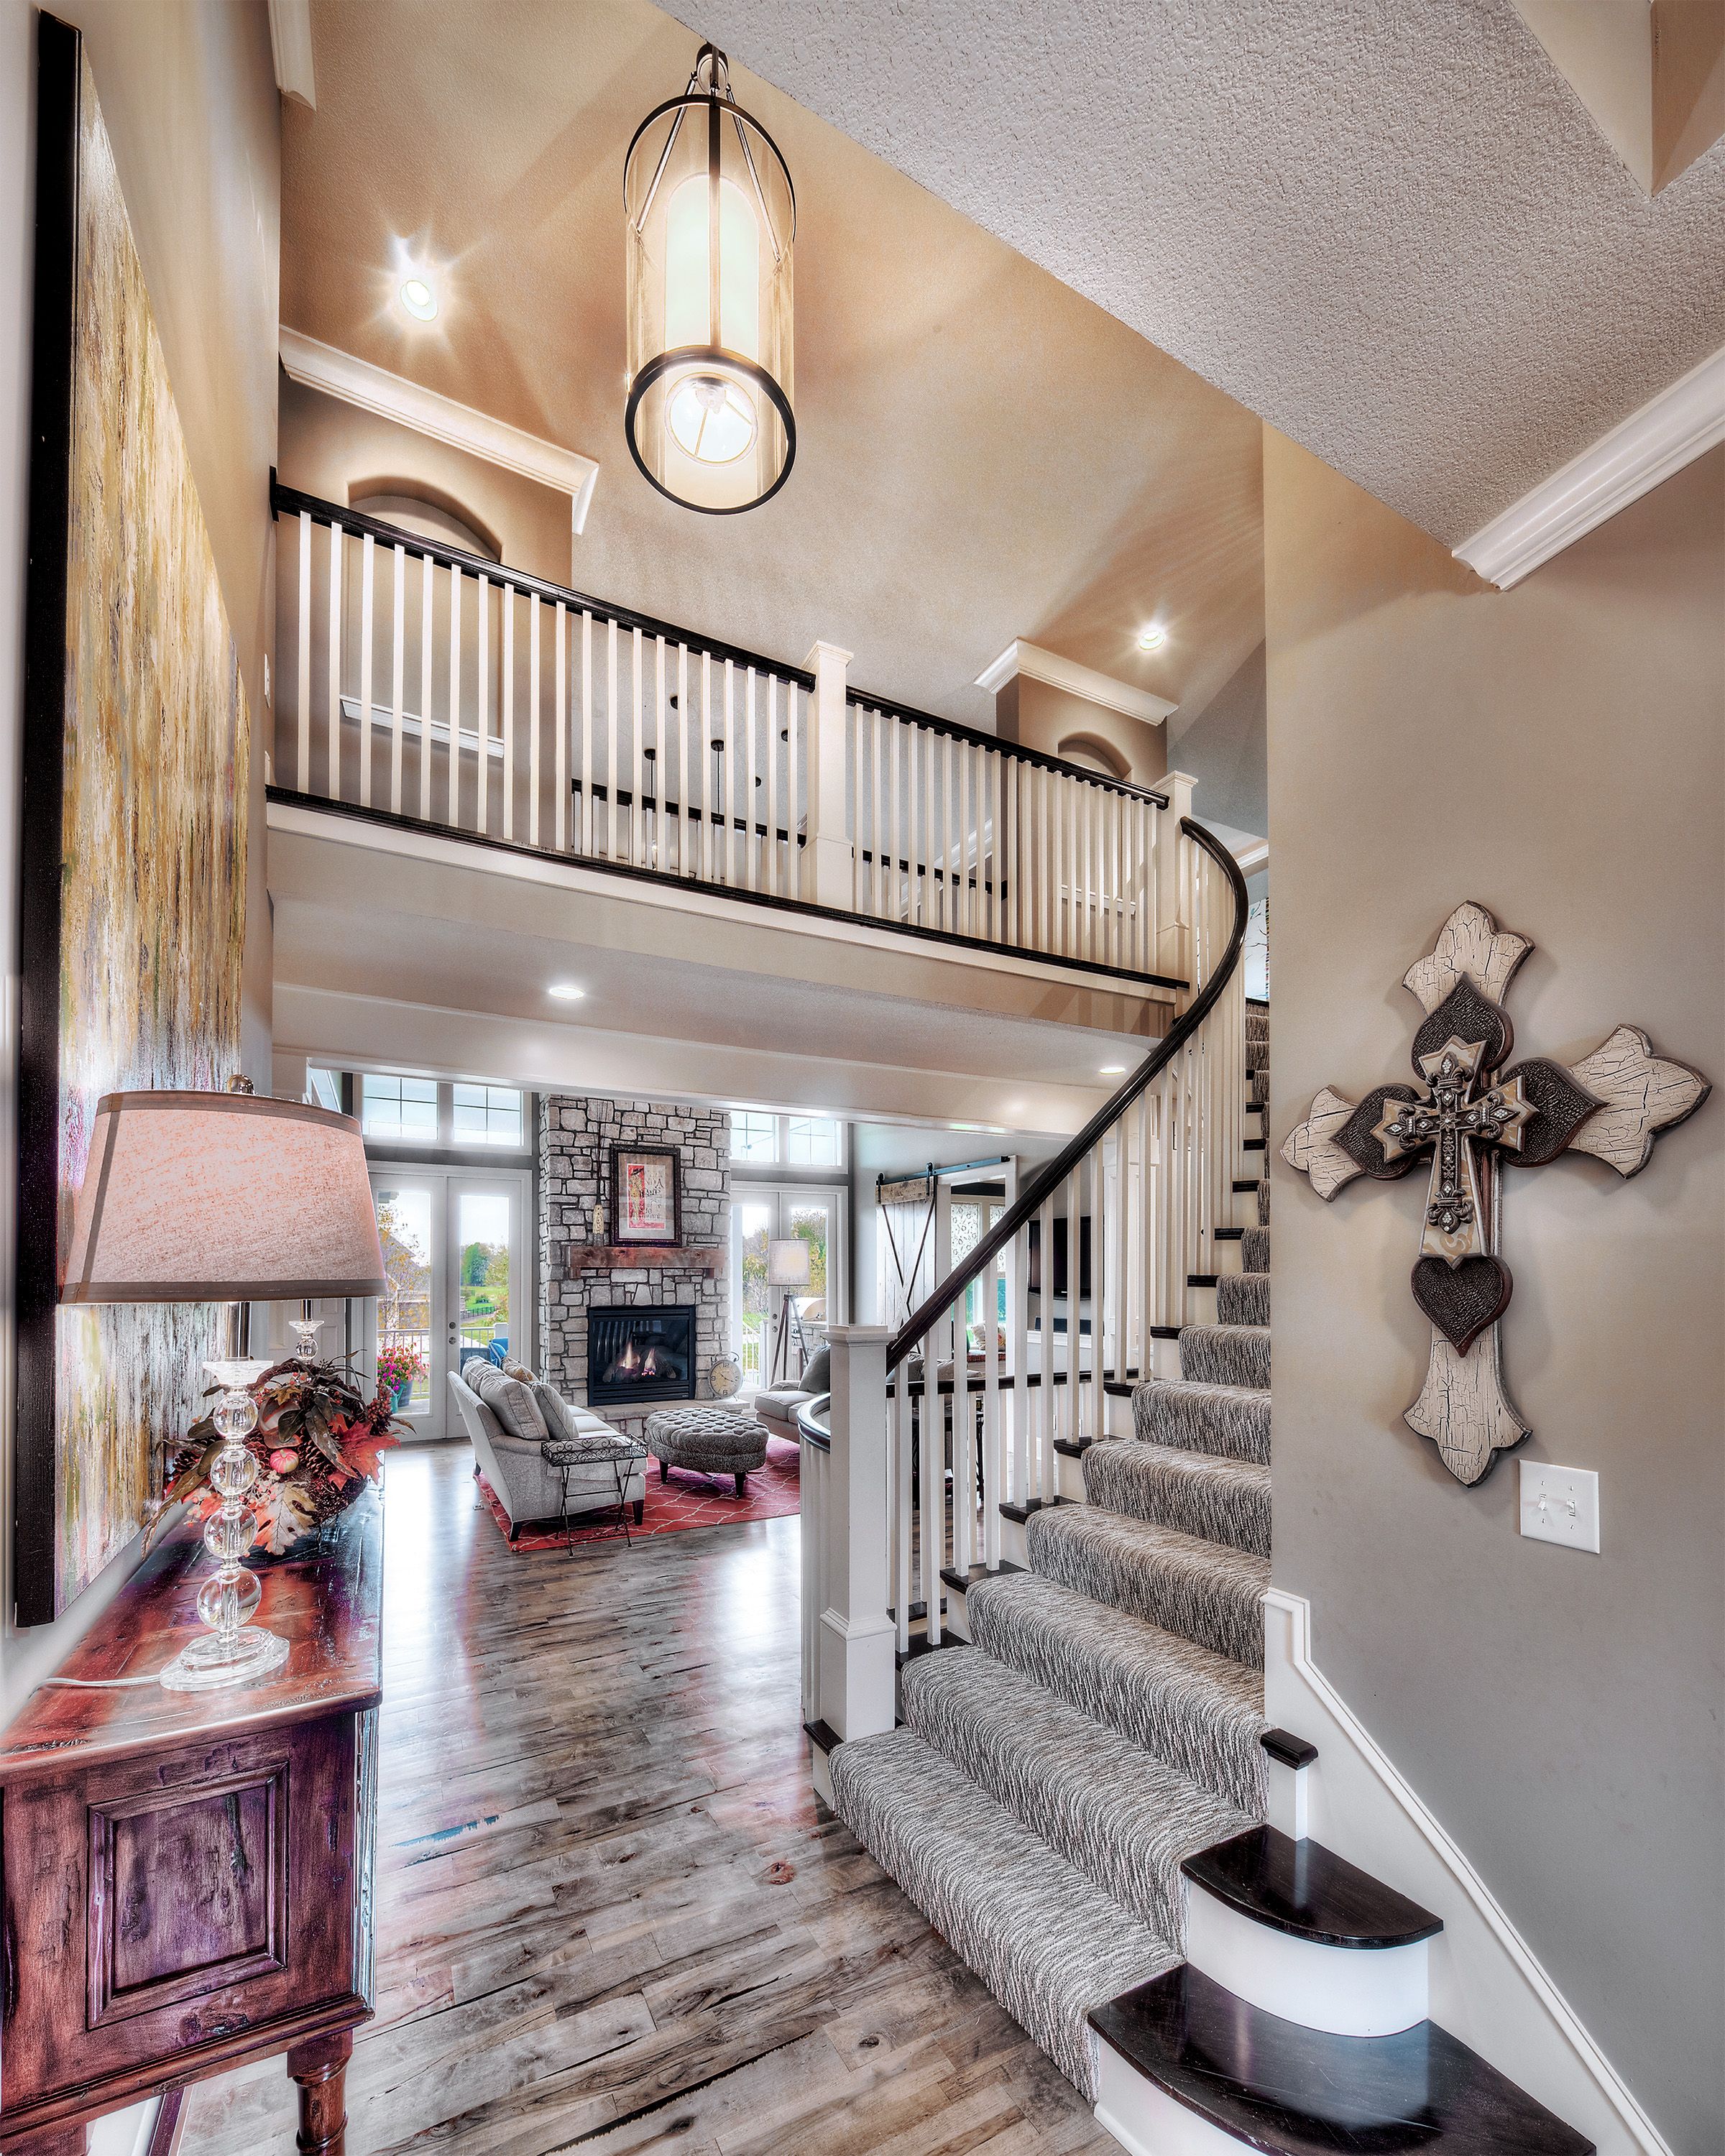 Entry curved staircase, open floor plan, pendant lighting